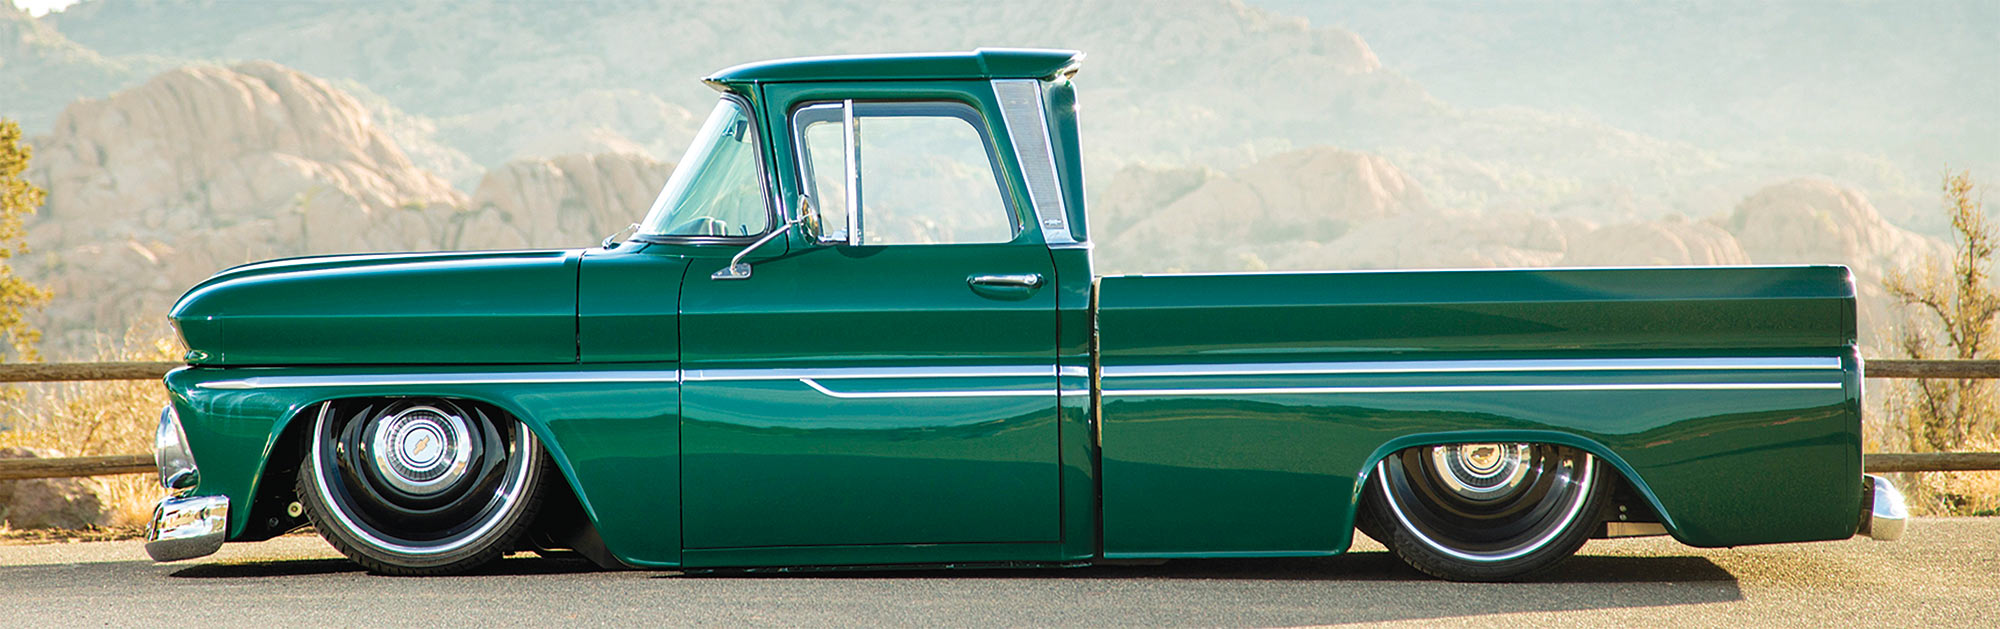 1963 Chevy C10 side profile with mountain backdrop